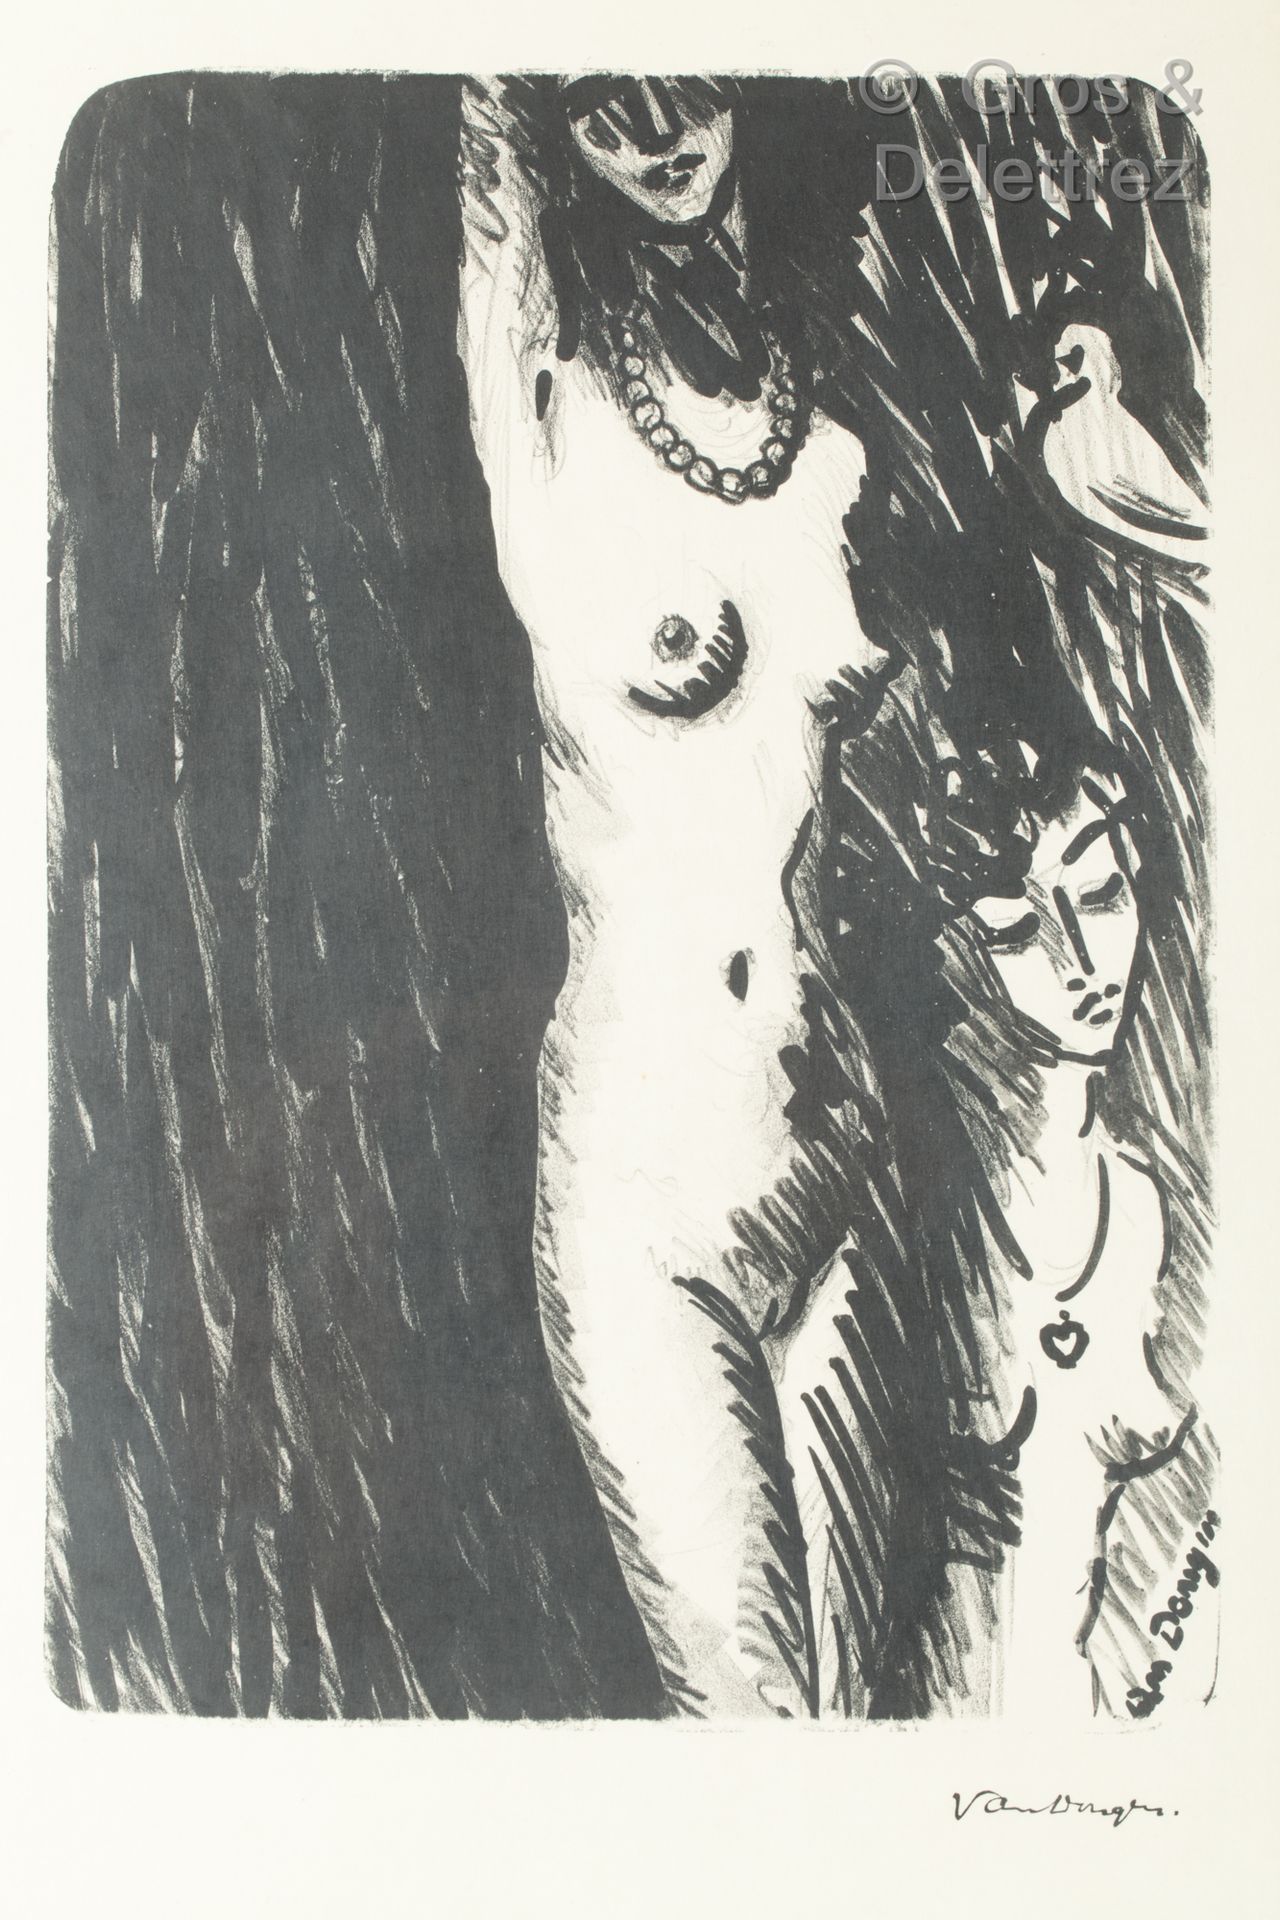 Kees VAN DONGEN (1877 – 1958) The Torso. 1924

Lithograph on Japon, signed with &hellip;